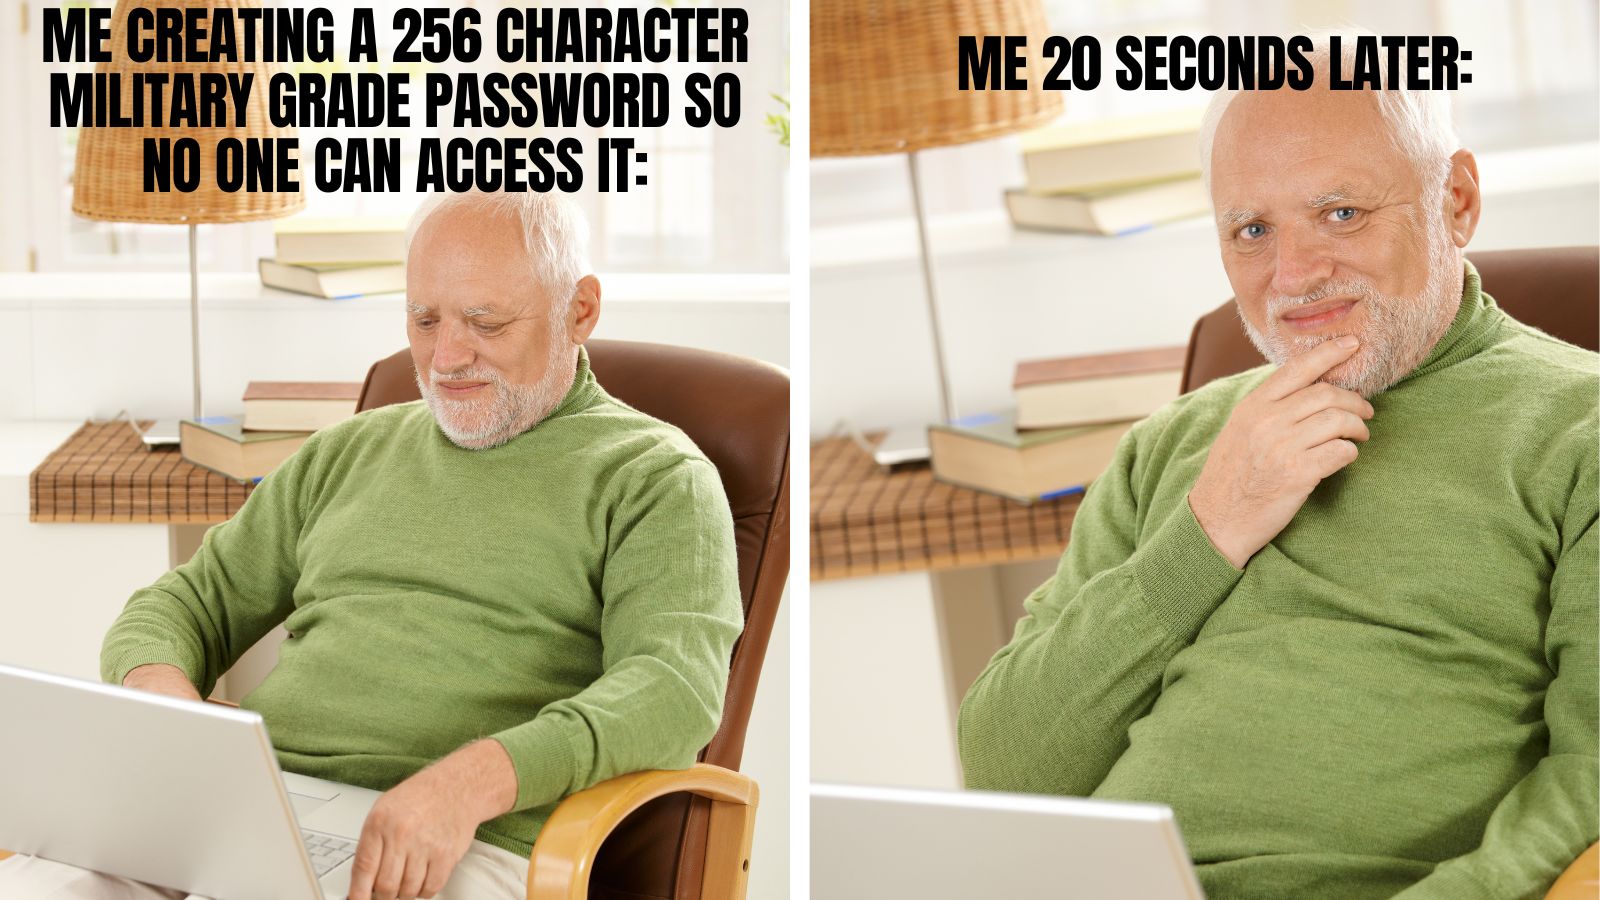 Me When I am creating a Password Vs. Me 20 seconds later...